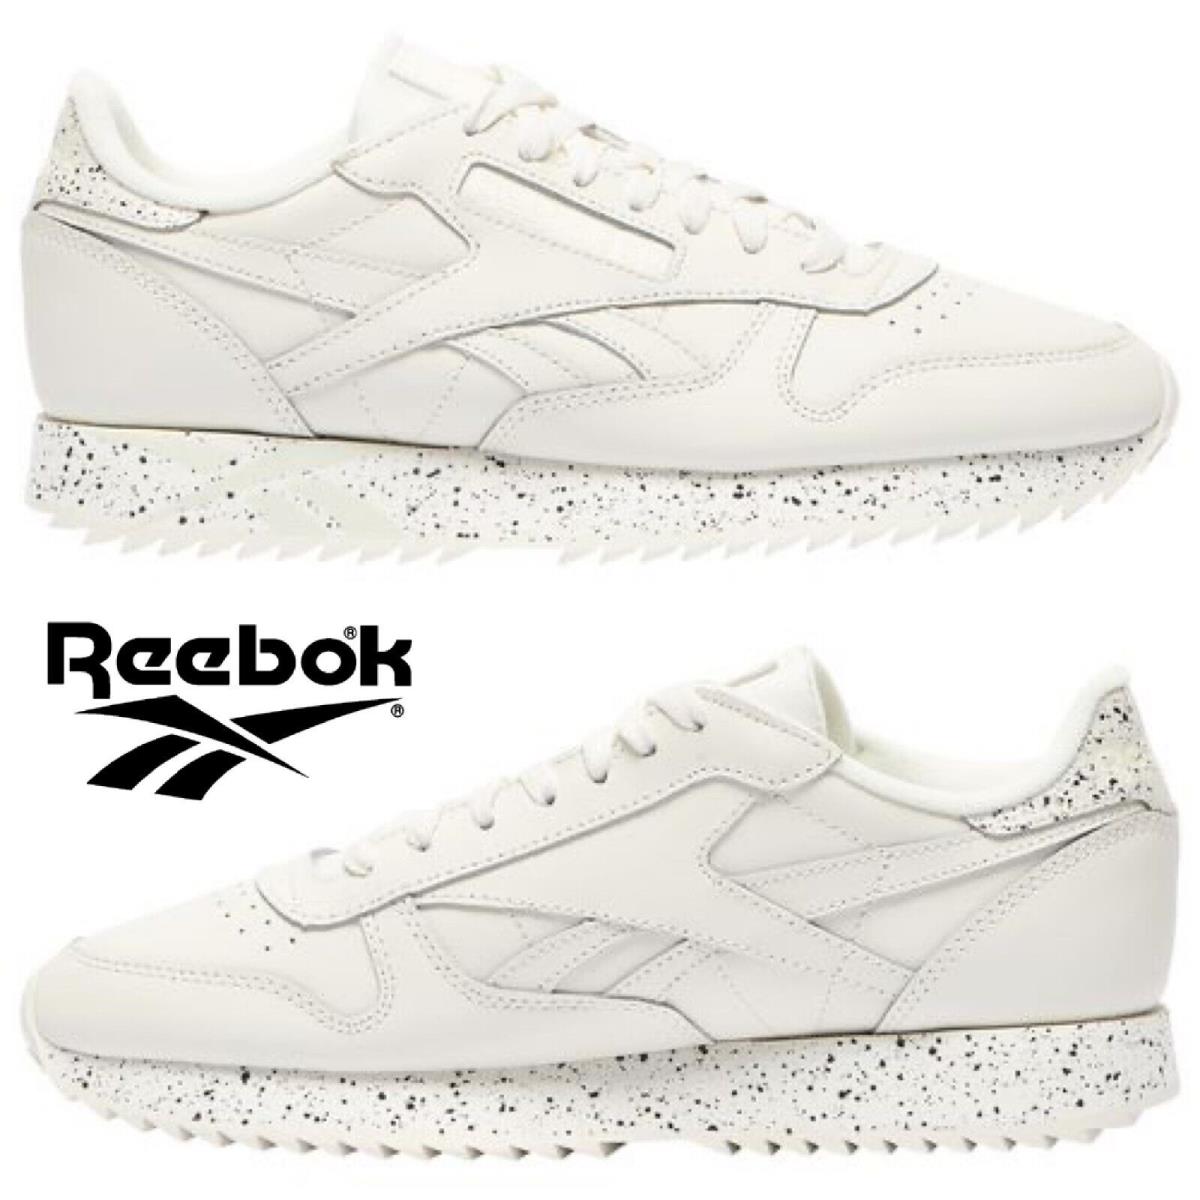 Reebok Classic Leather Men`s Sneakers Running Training Shoes Casual Sport